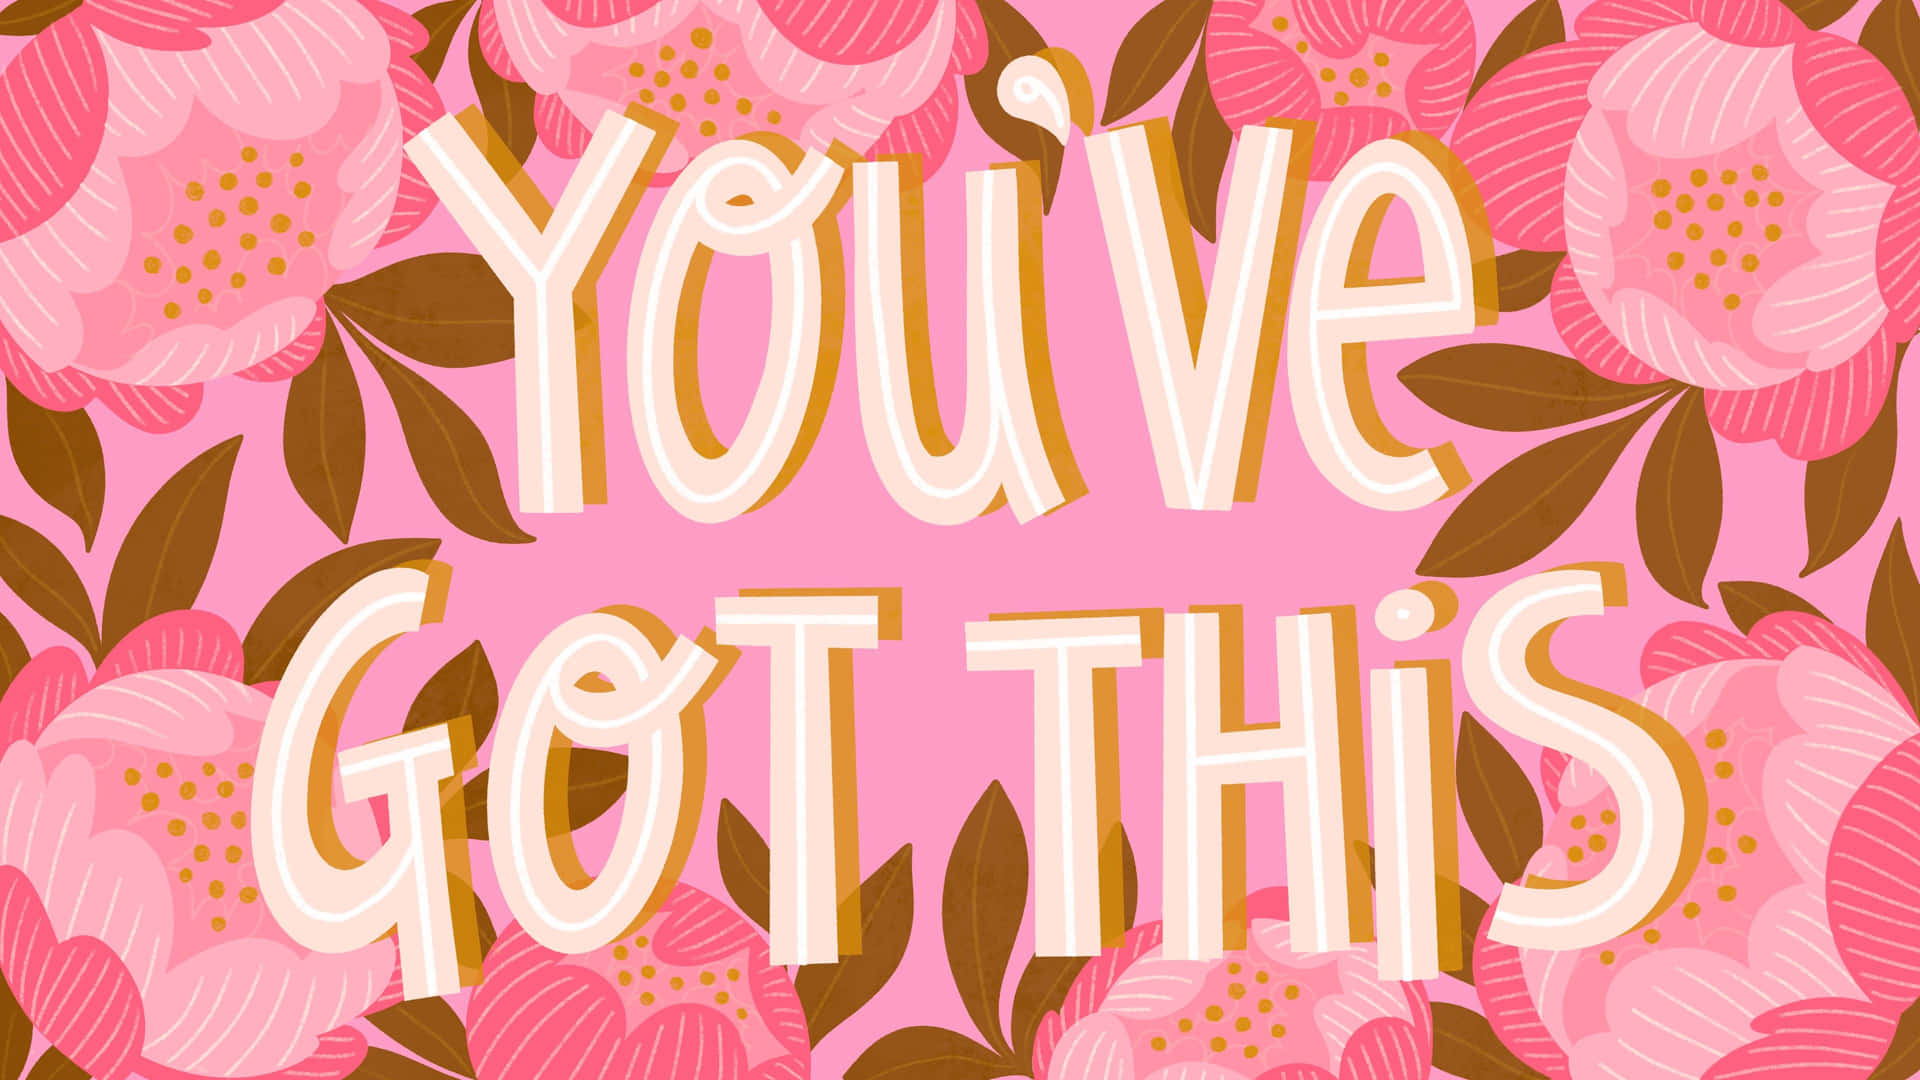 You've Got This - Pink Floral Print Background